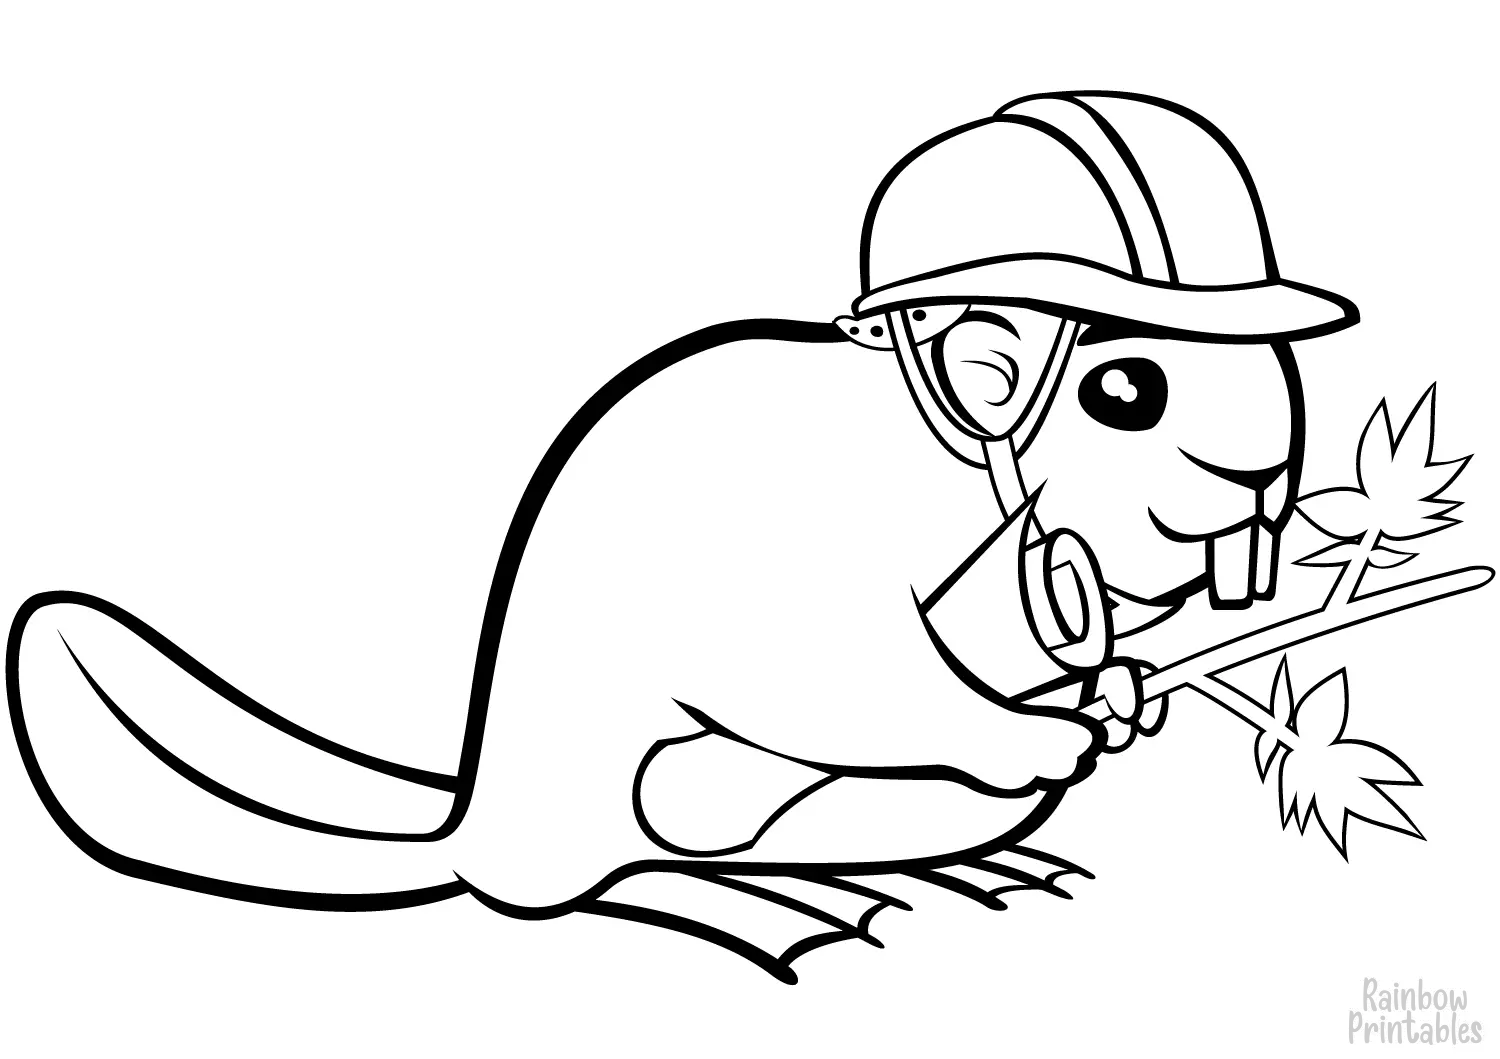 Simple Easy Color Animal Pages for Kids funny-chipmunk-in-a-helmet-coloring-page for small boys